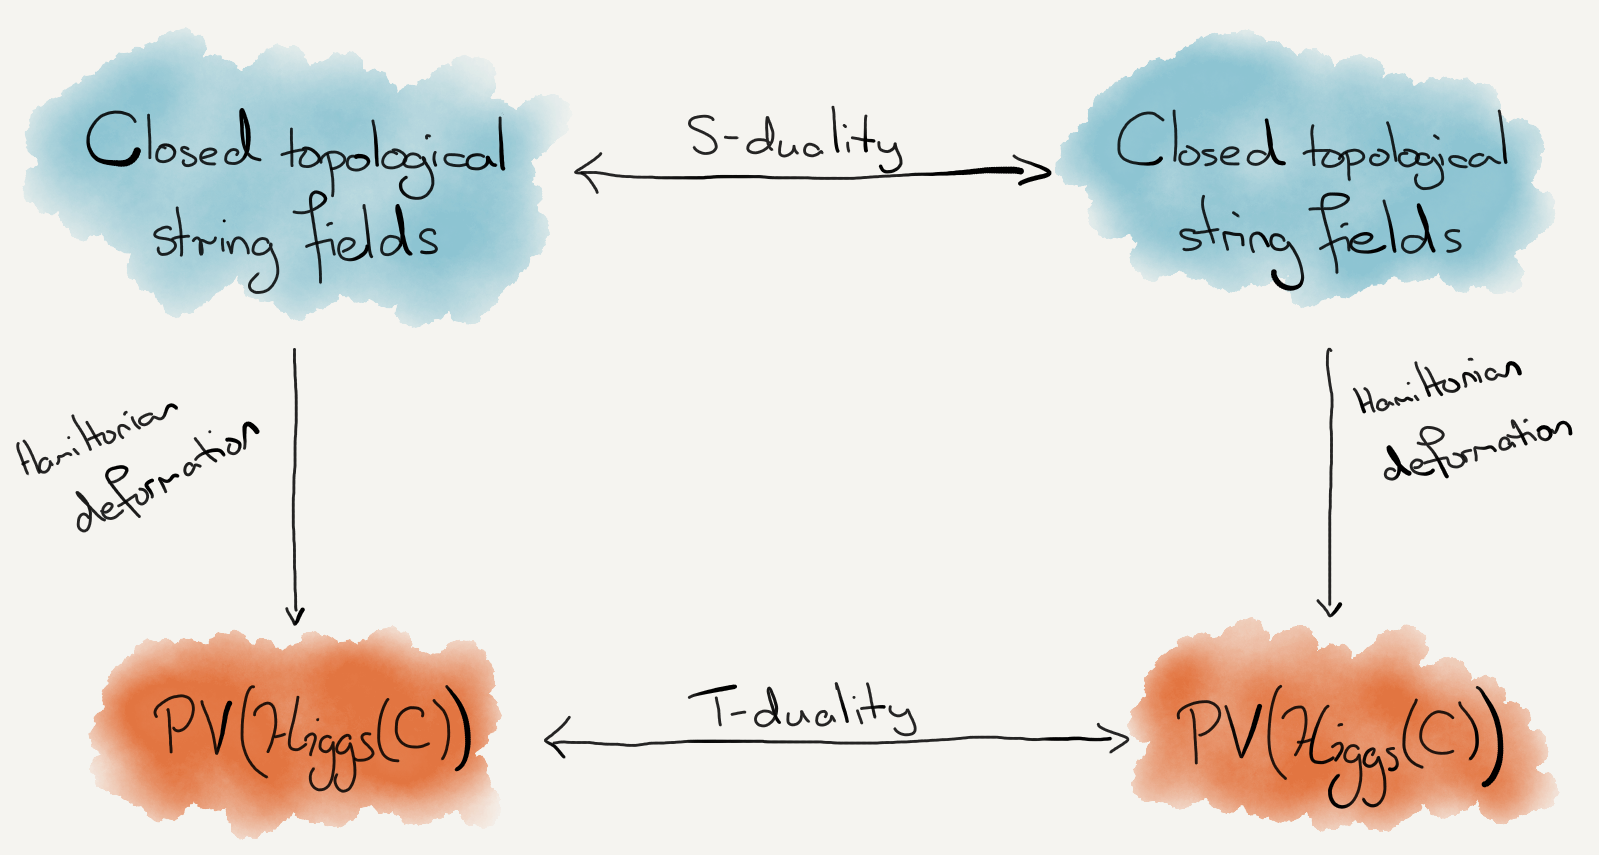 Relation between S- and T-duality